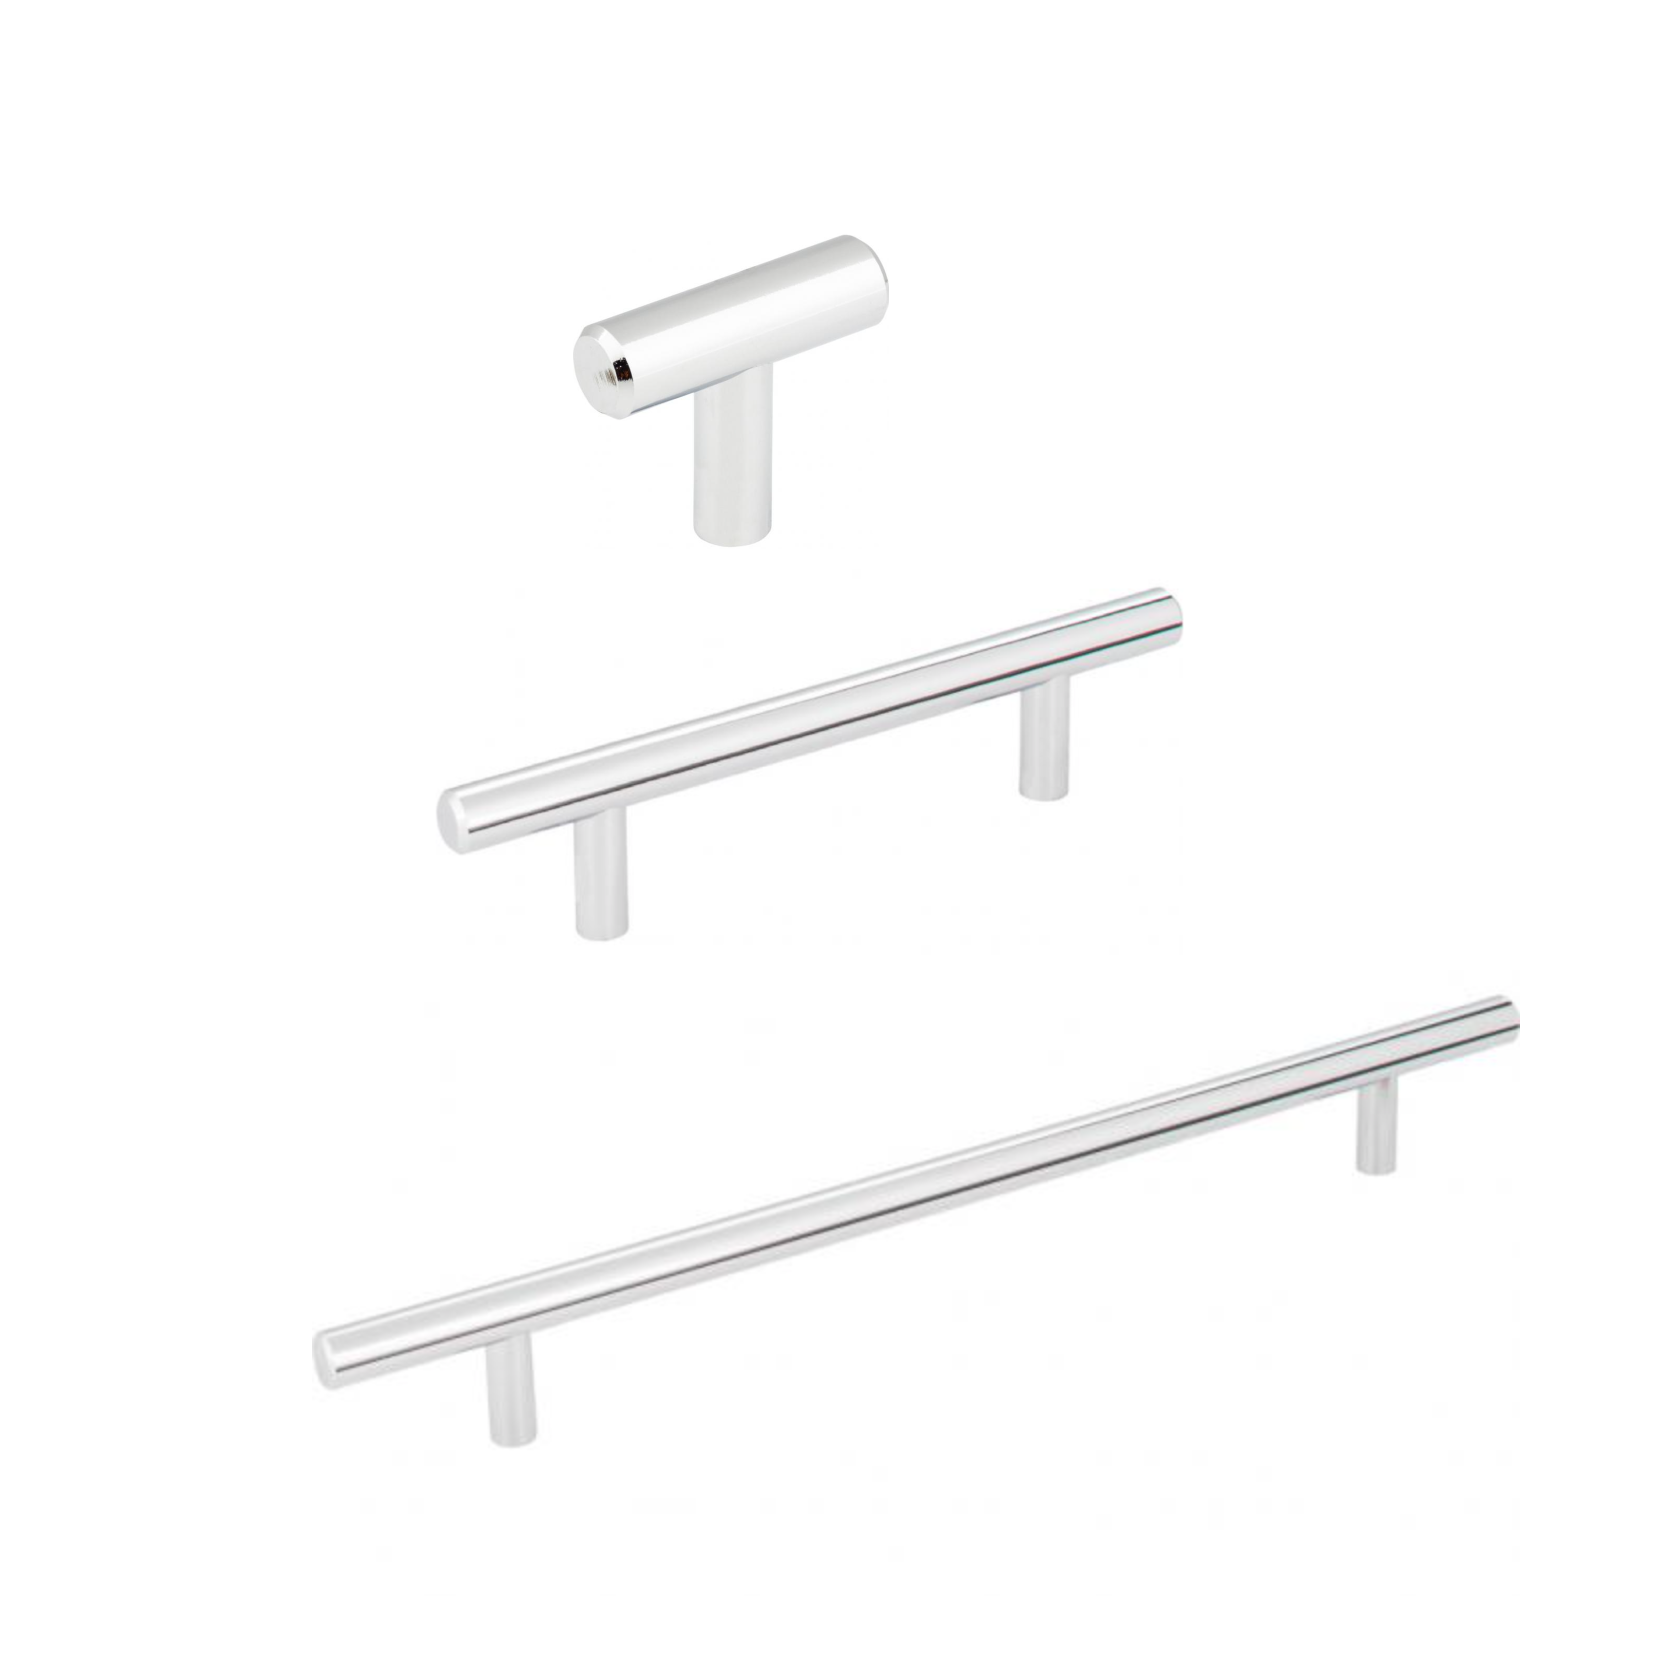 Polished Chrome "Dash" T-Bar Round Knob and Drawer Pulls - Industry Hardware